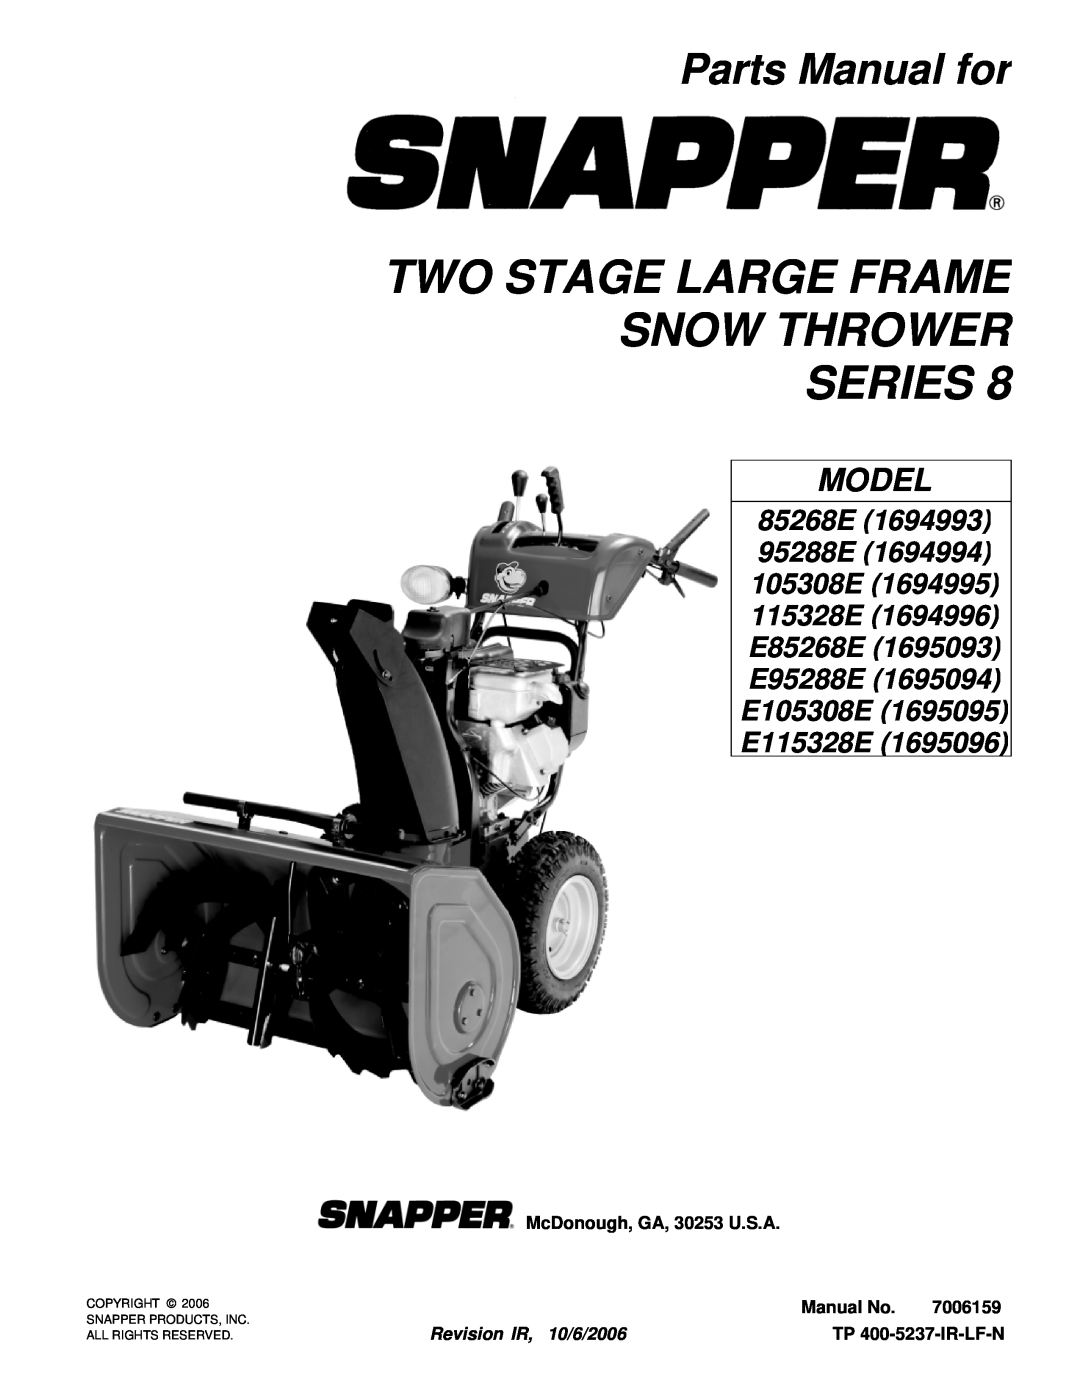 Snapper E95288E manual Two Stage Large Frame Snow Thrower Series, Parts Manual for, McDonough, GA, 30253 U.S.A, Manual No 